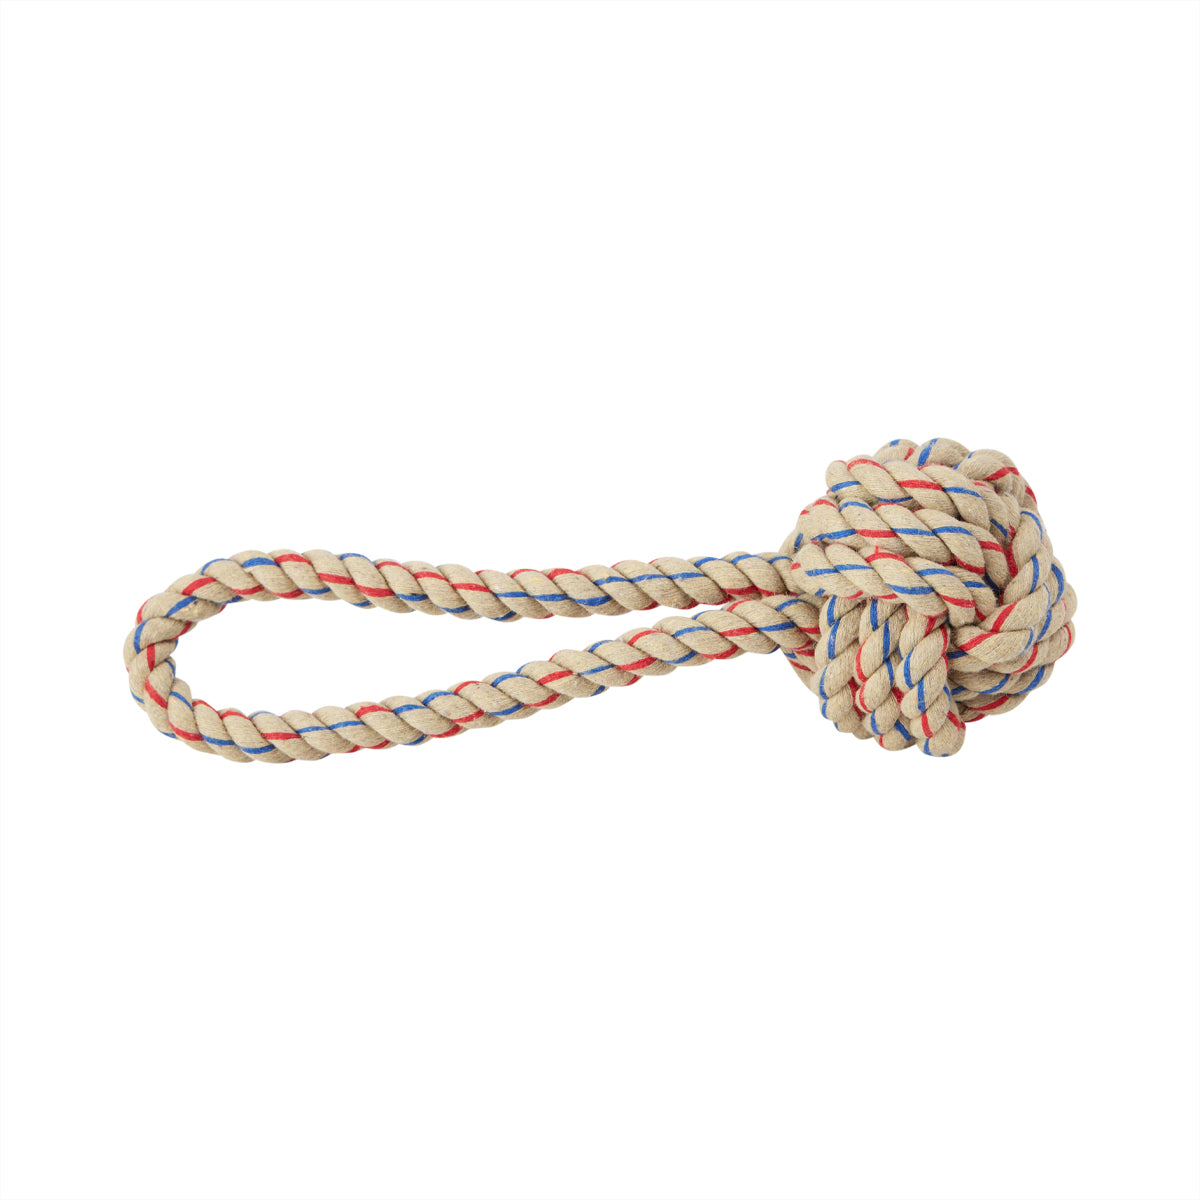 OYOY ZOO Otto Rope Dog Toy Let's Play 207 Mellow